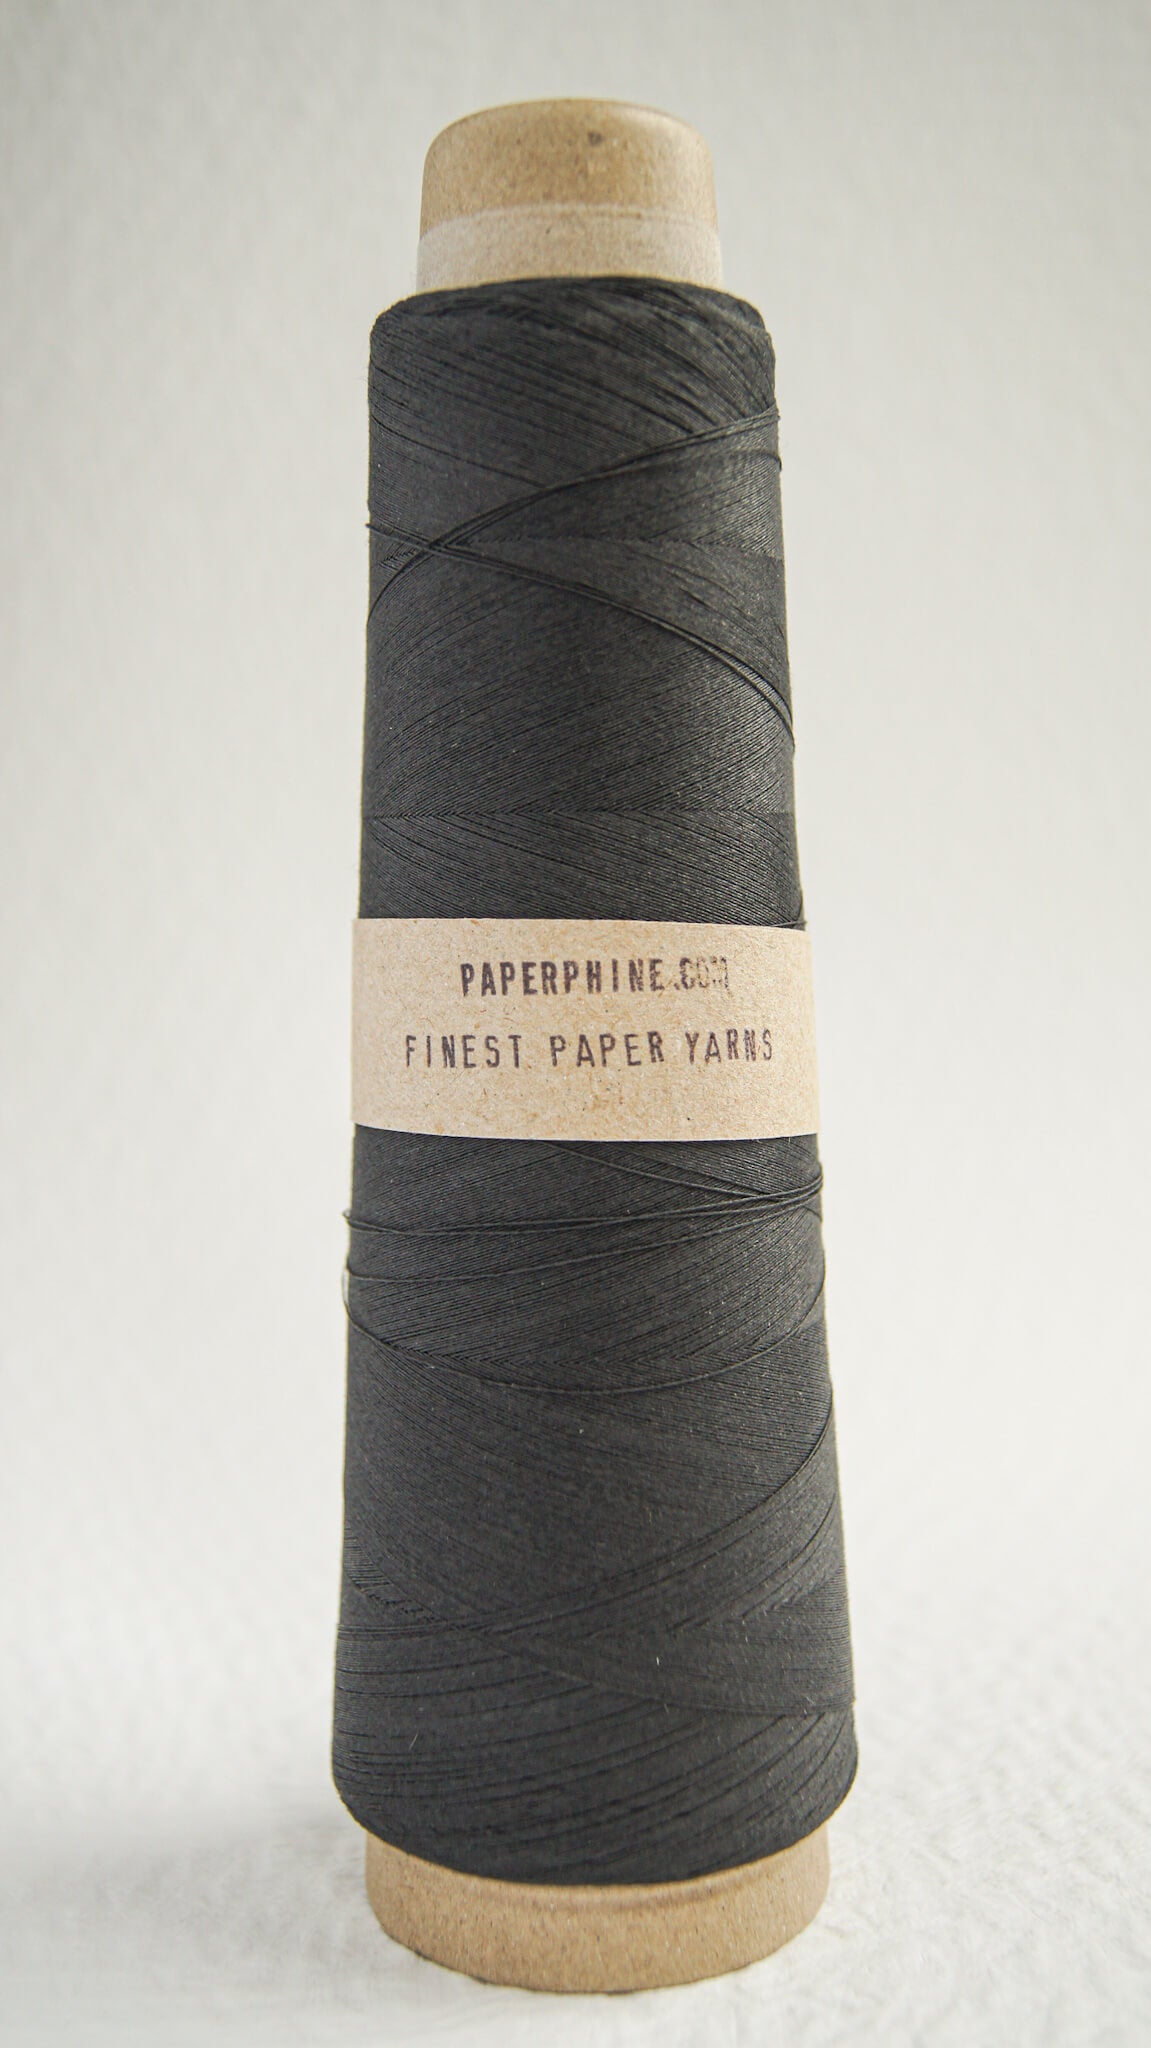 Fil de papier très fin Paperphine, pour tricot machine et tissage - Finest paper yarn on cone from Paperphine, for machine-knitting and weaving